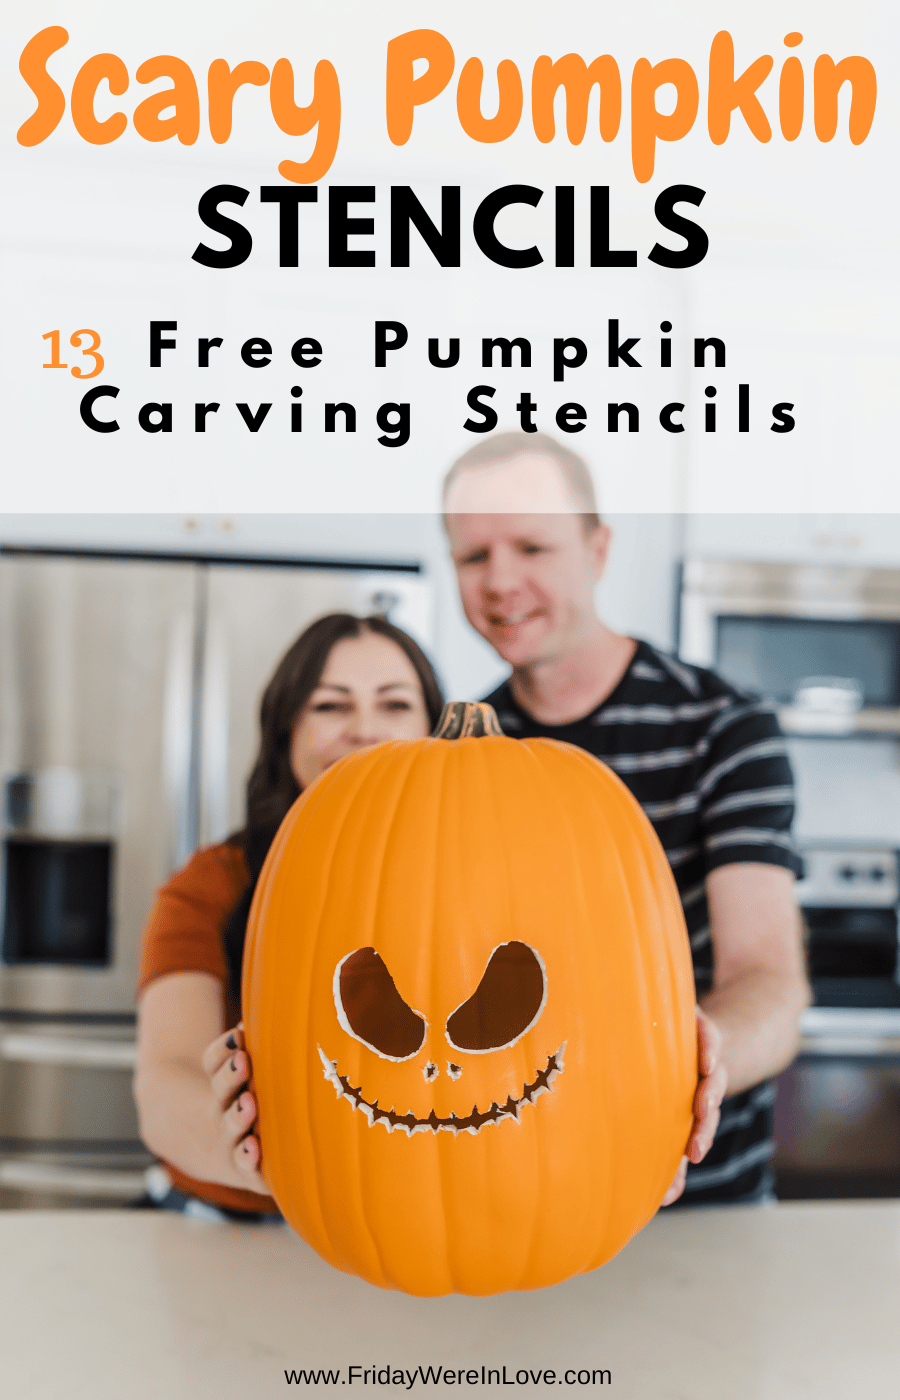 Scary Pumpkin Stencils: Free Printable! - Friday We're In Love